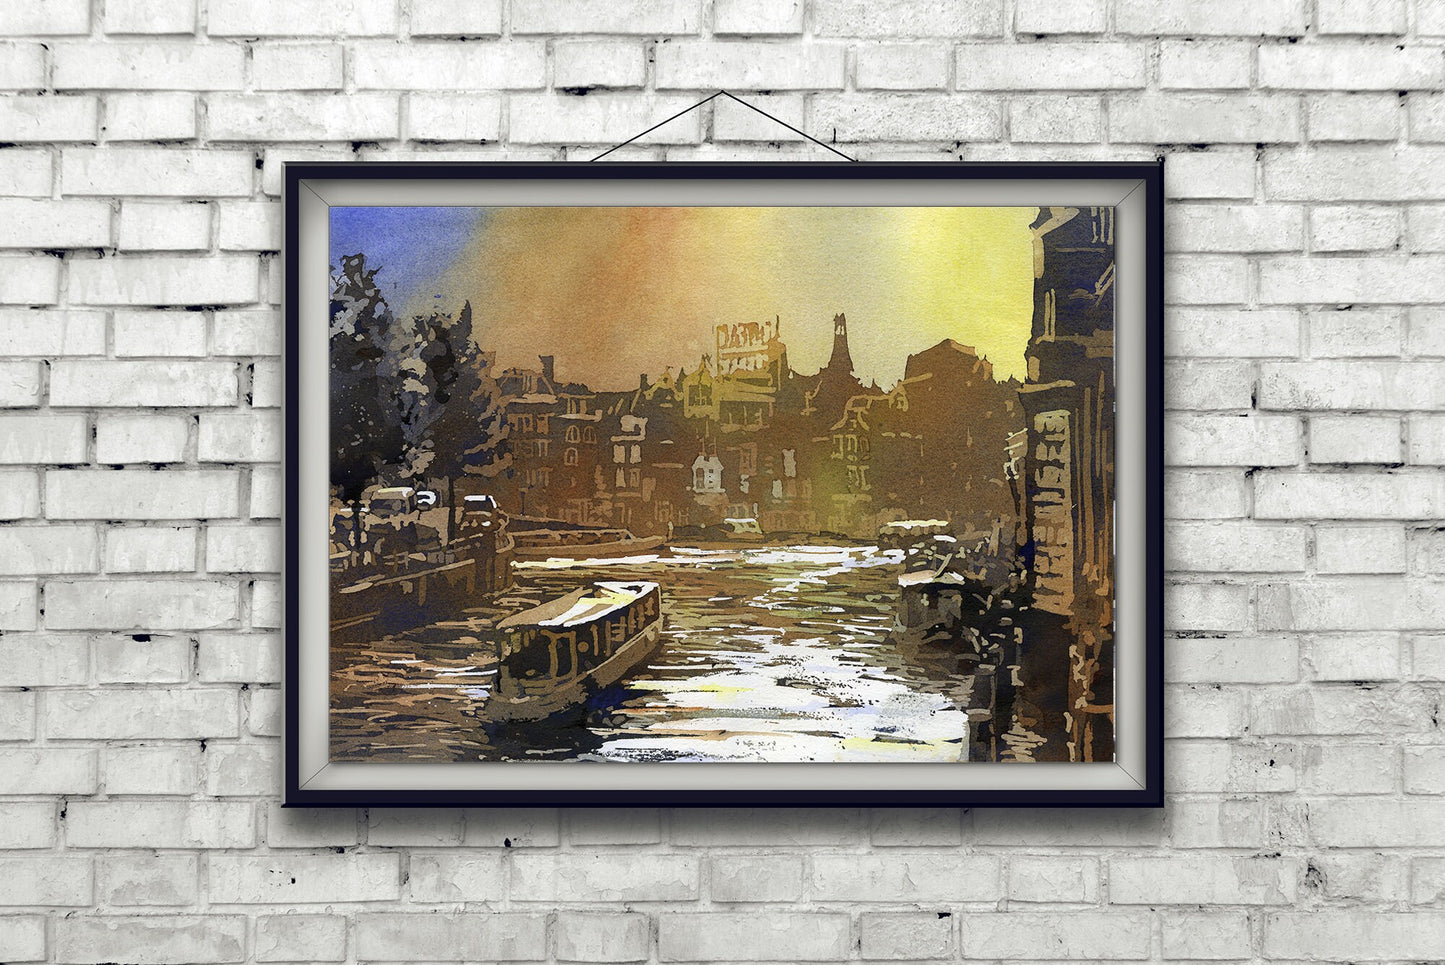 Sunset over canals of Old Amsterdam.  Watercolor painting of gabled facades of old architecture in central Amsterdam watercolor painting